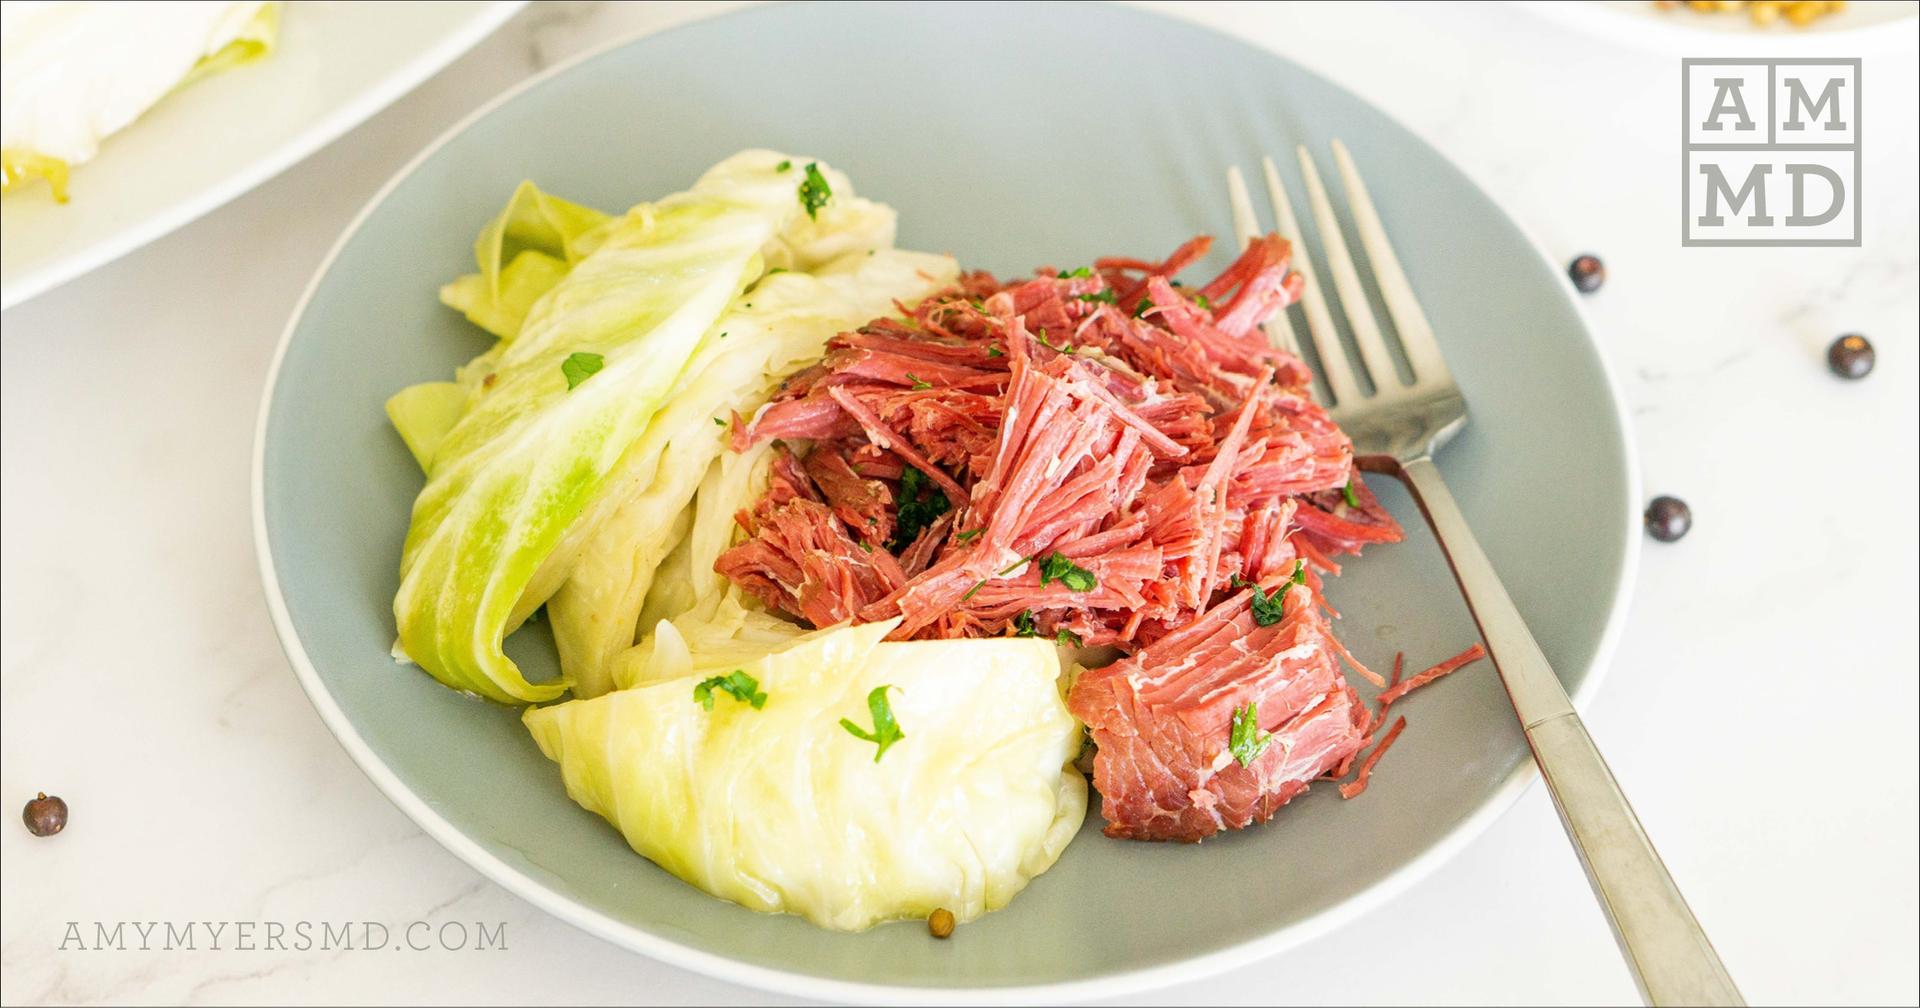 Keto Corned Beef and Cabbage